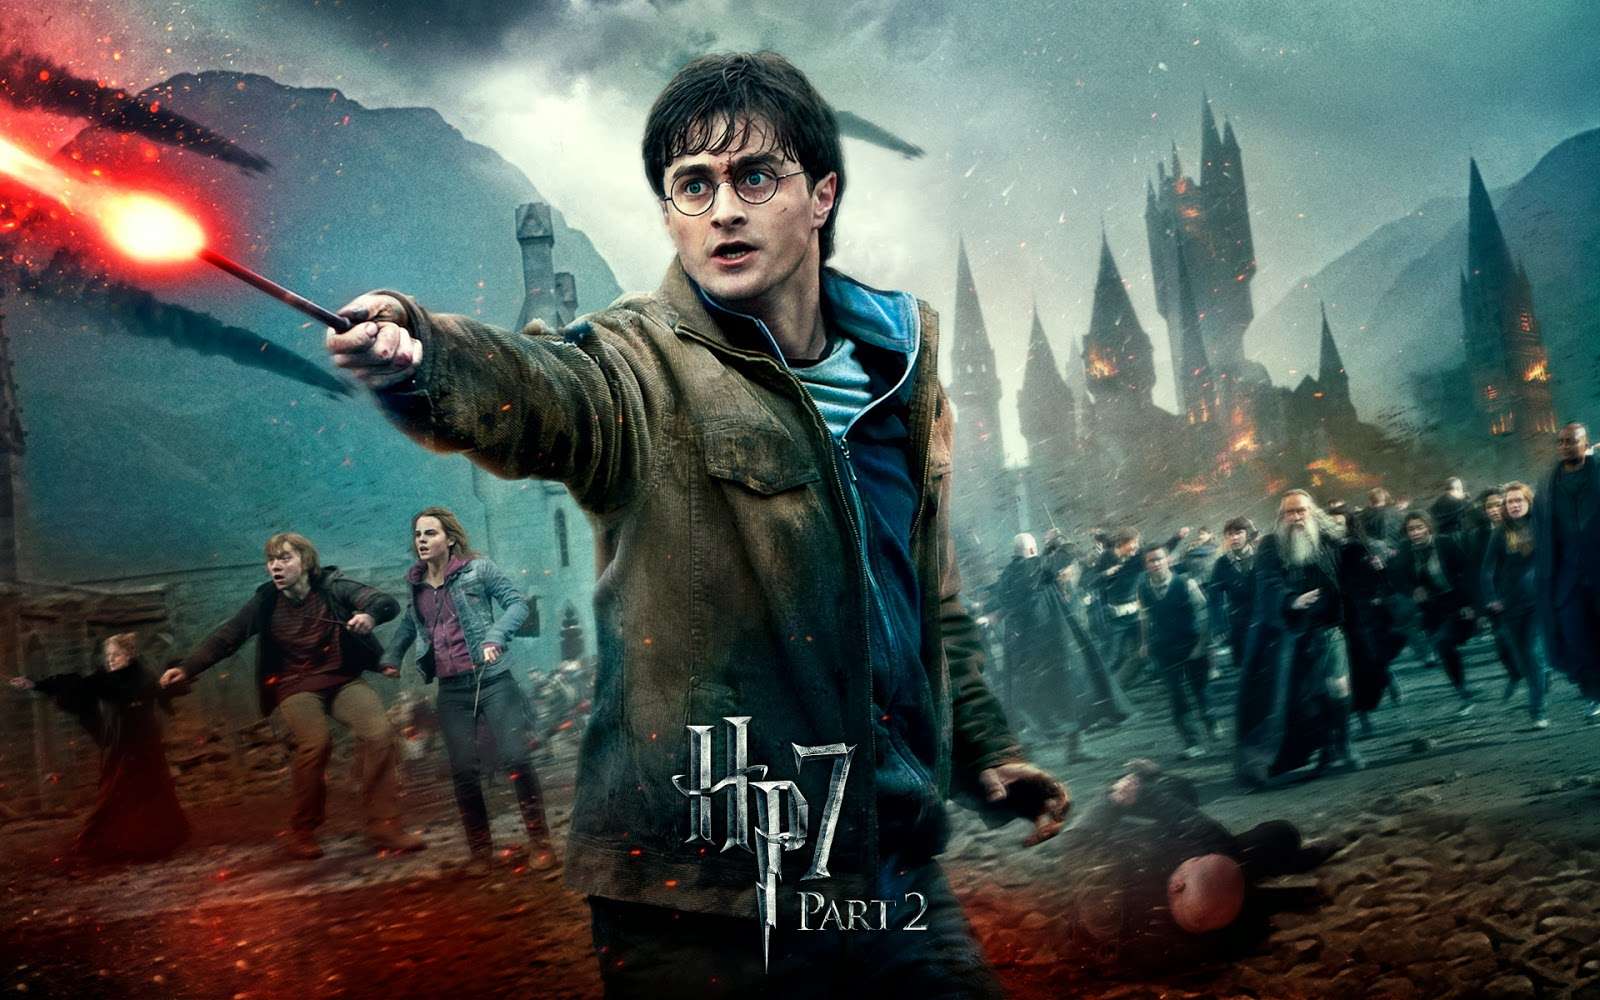 Mr. Movie: Harry Potter and the Deathly Hallows Part 2 (2011, Movie Review)